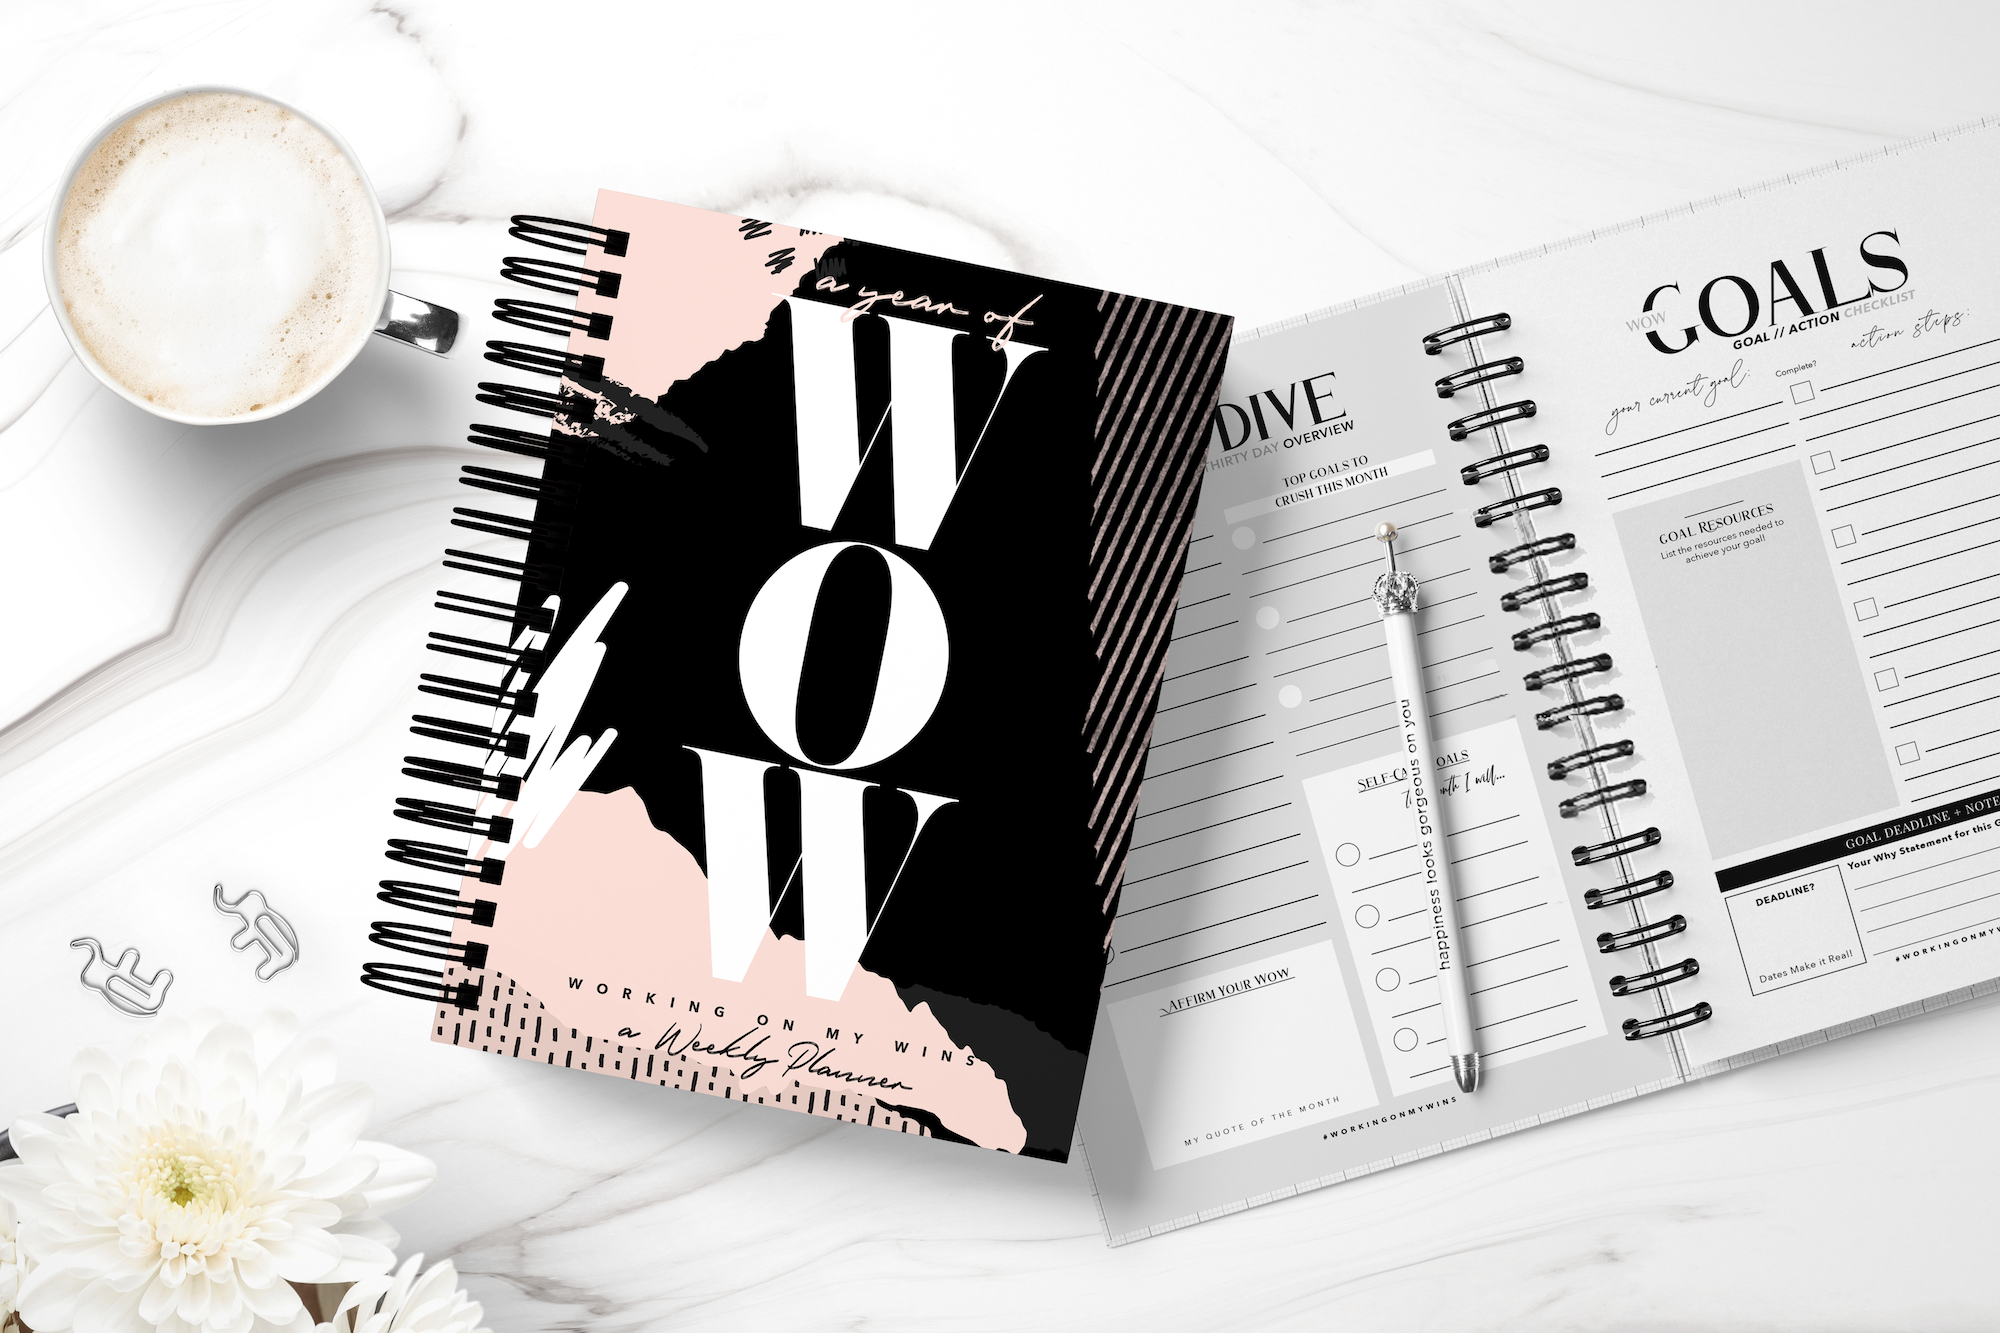 WOW Planner - Create Your Winning Year